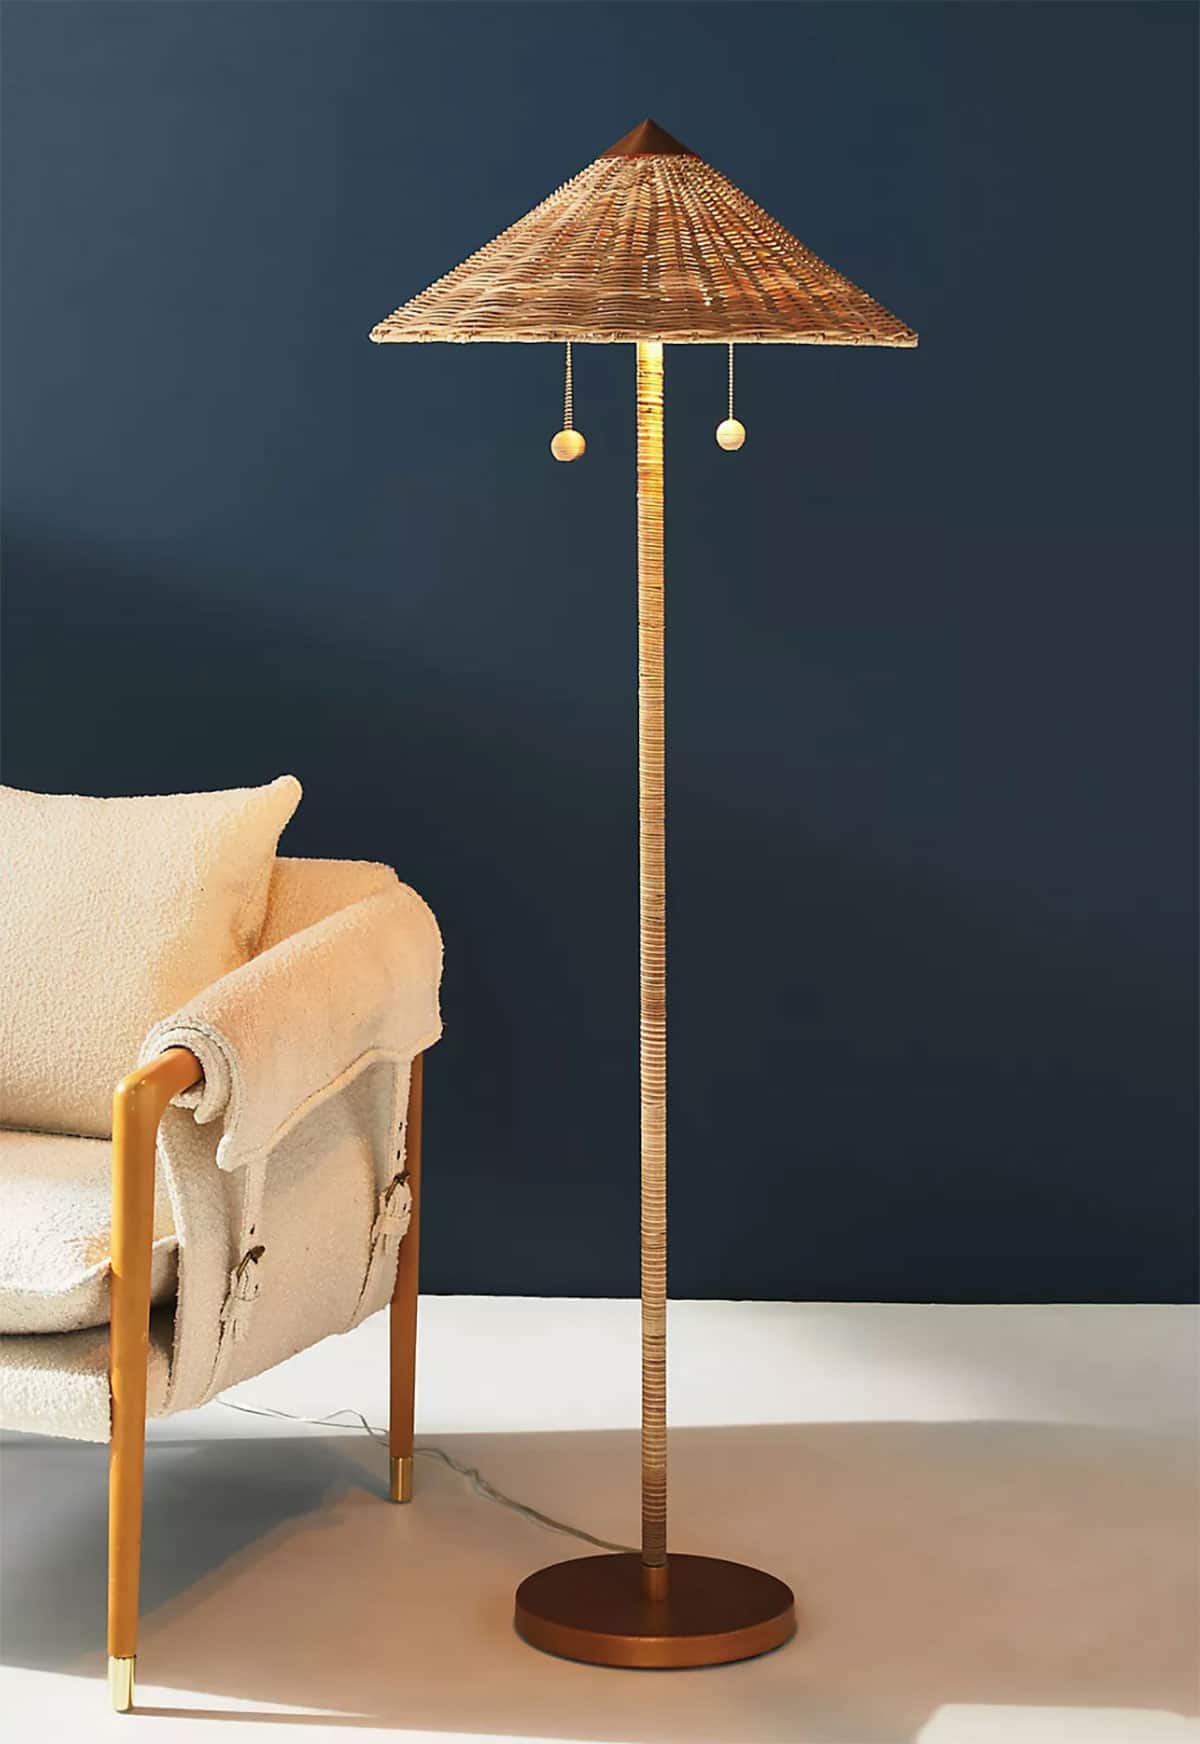 Rattan Lighting - rattan floor lamp and lampshade with cane wrapping